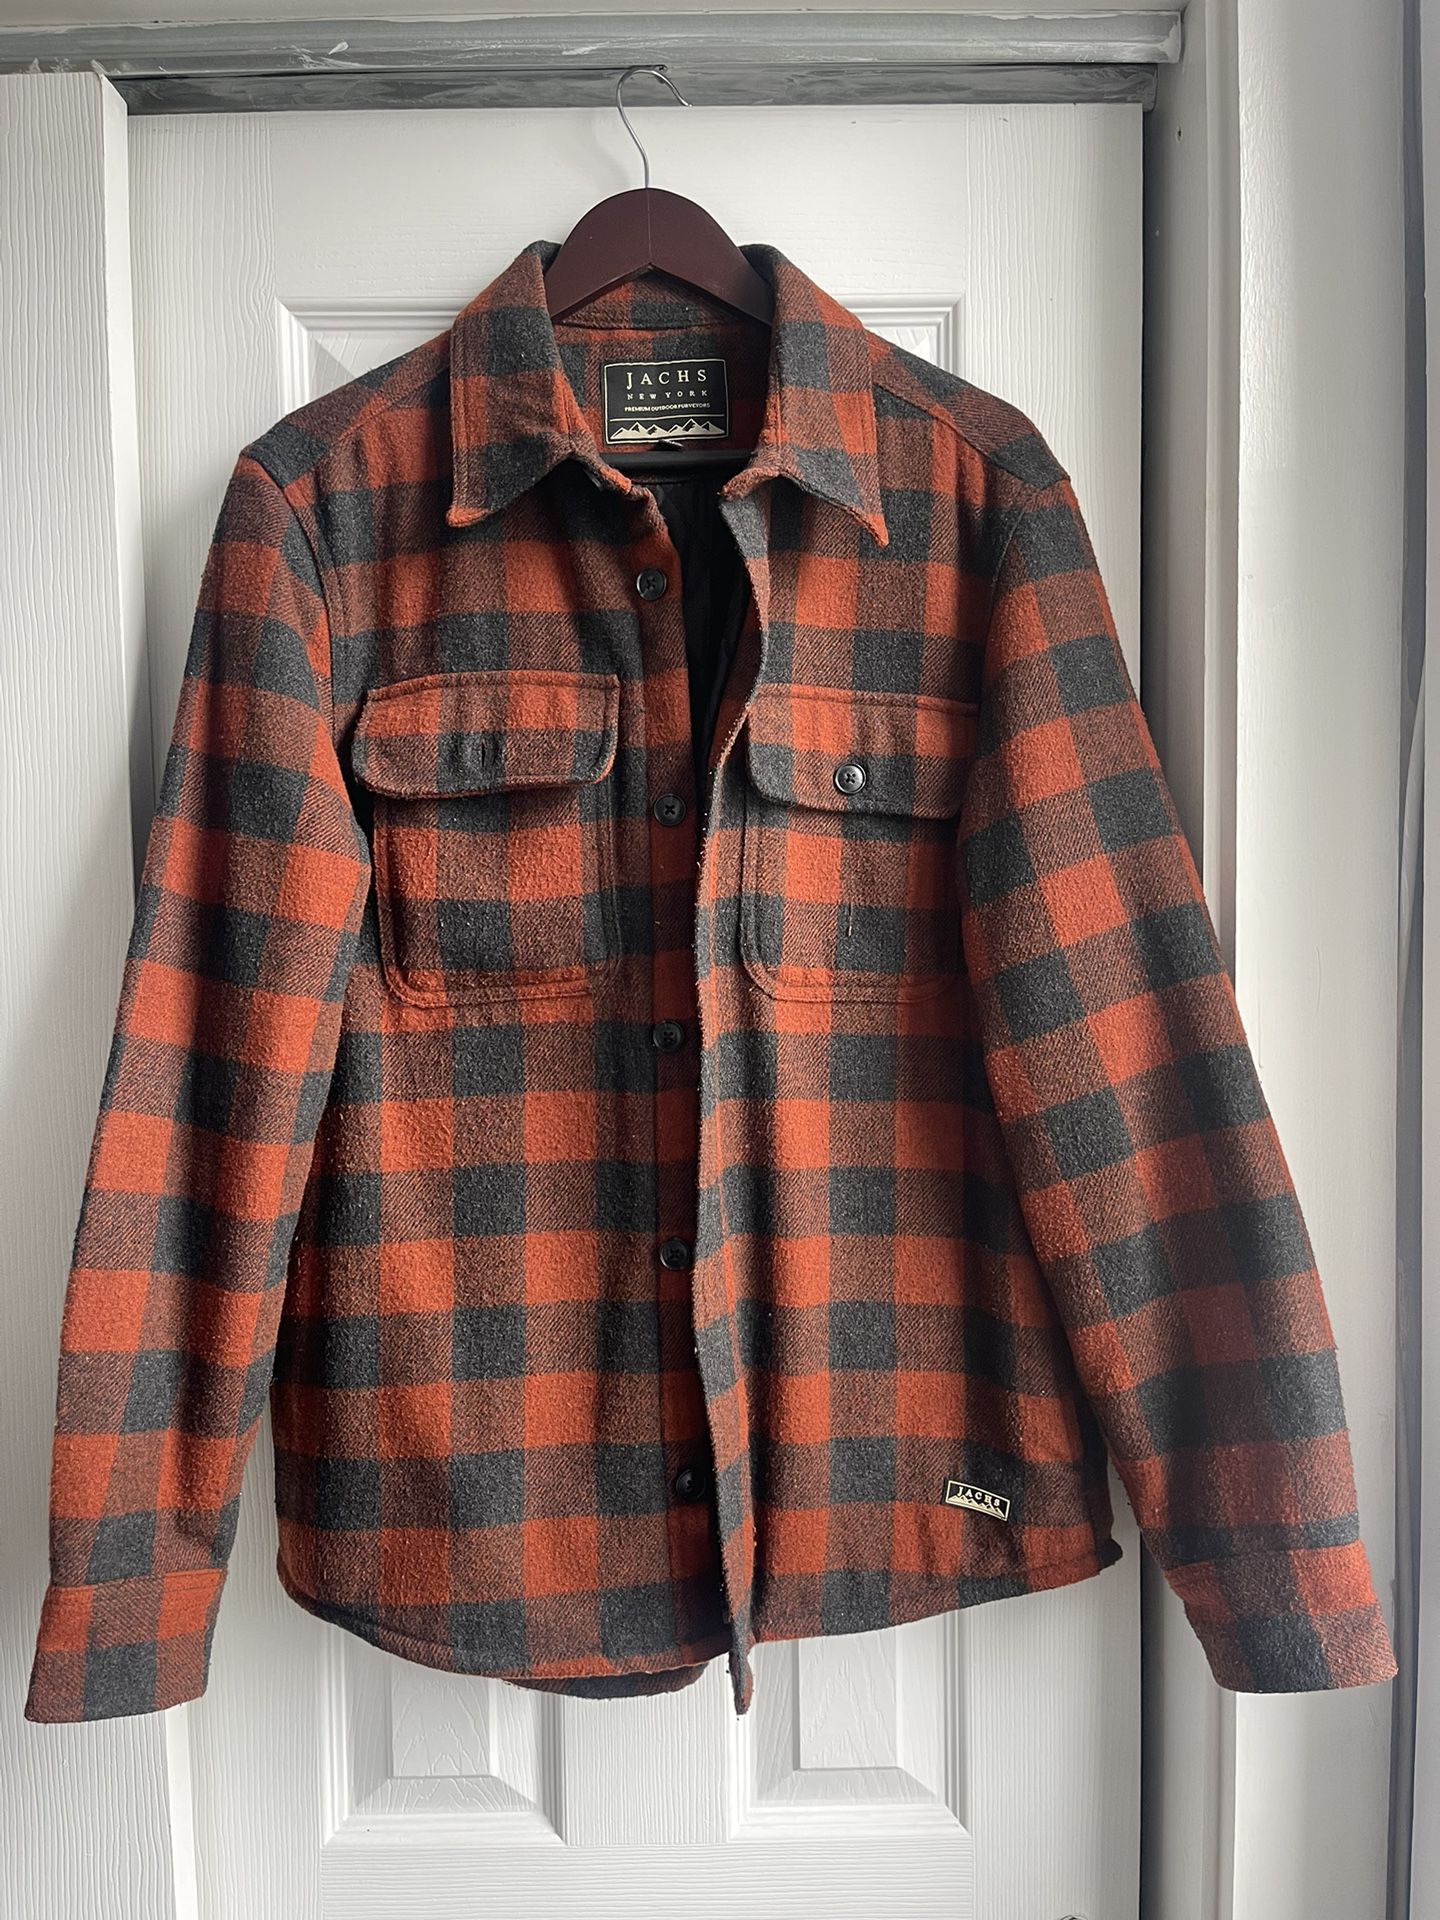 JACHS - NEW YORK | Men’s Red Flannel Jacket Quilted Lined - Medium 